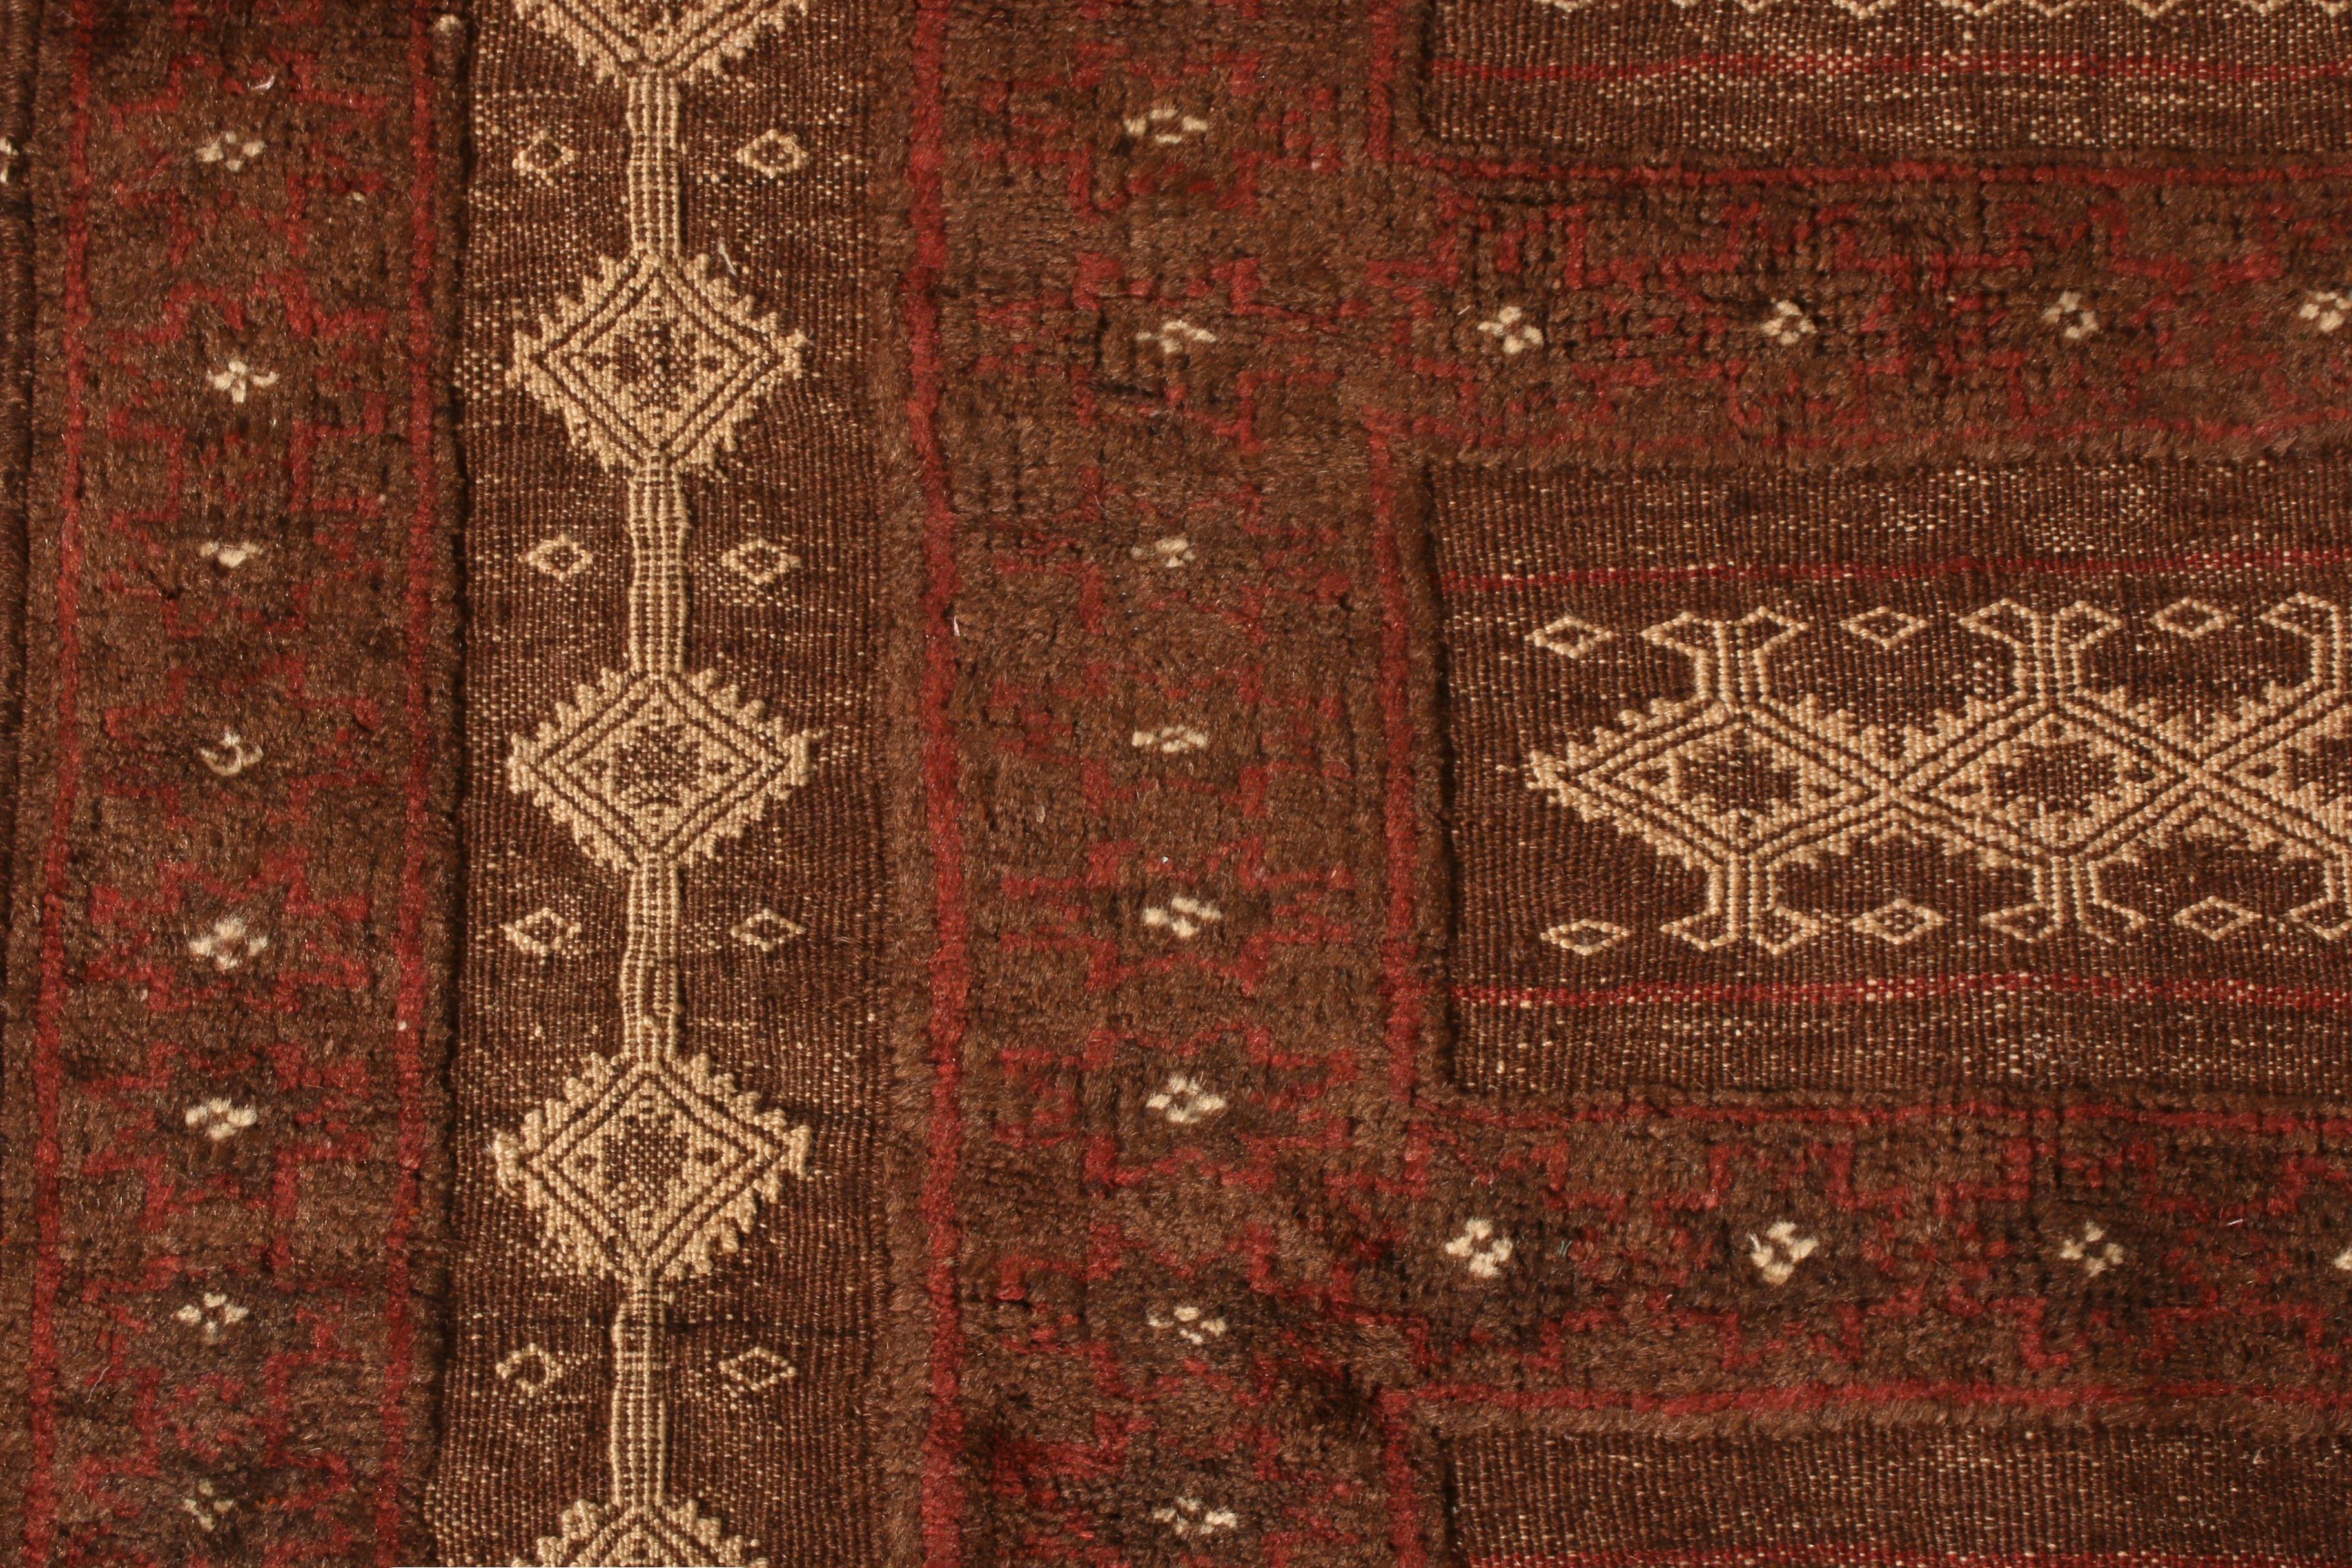 Hand-Woven Handwoven Vintage Kilim Brown Beige and Red Traditional Flat-Weave